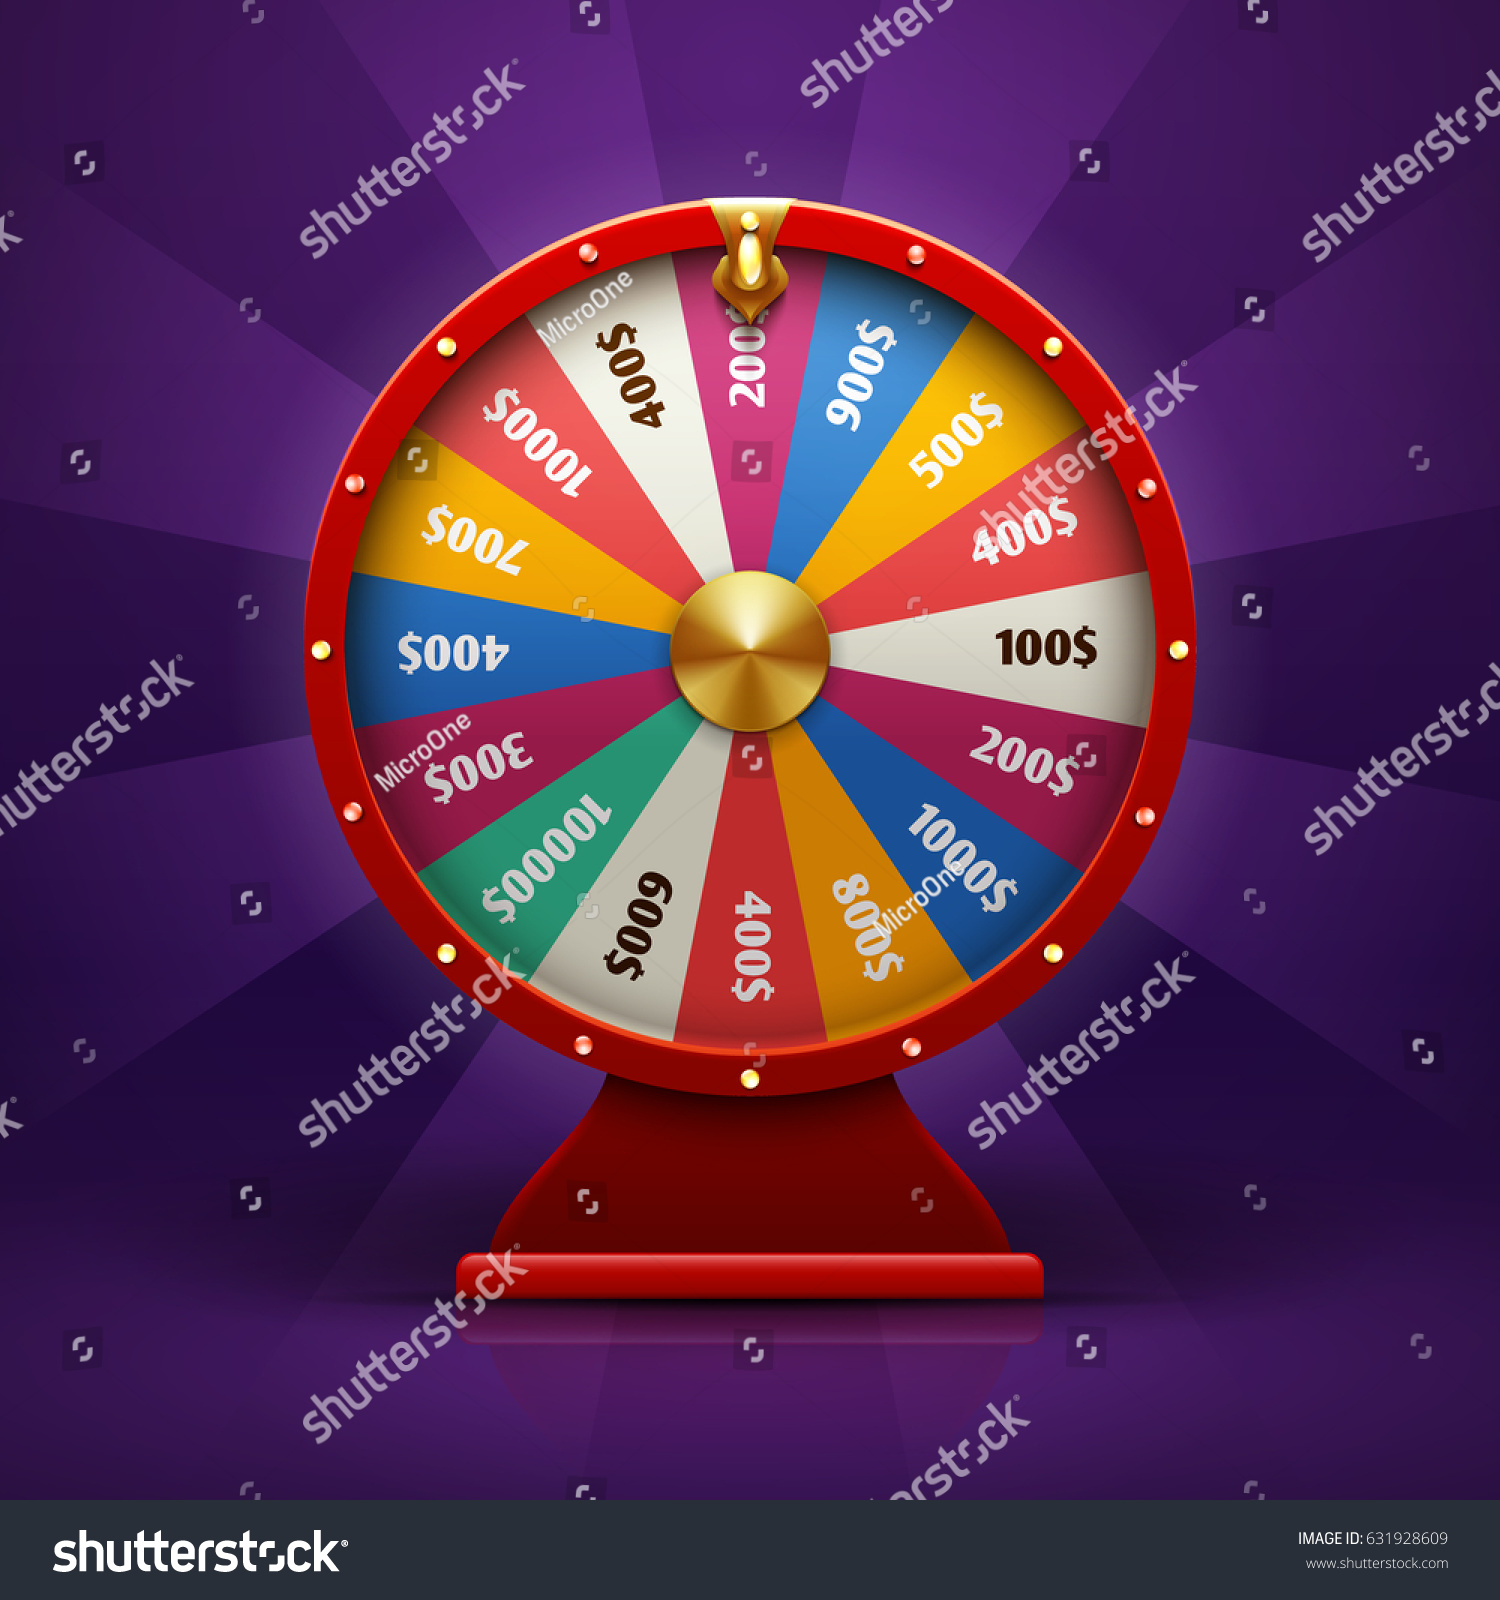 Realistic 3d Spinning Fortune Wheel Lucky Stock Vector 631928609 - Shutterstock1500 x 1600